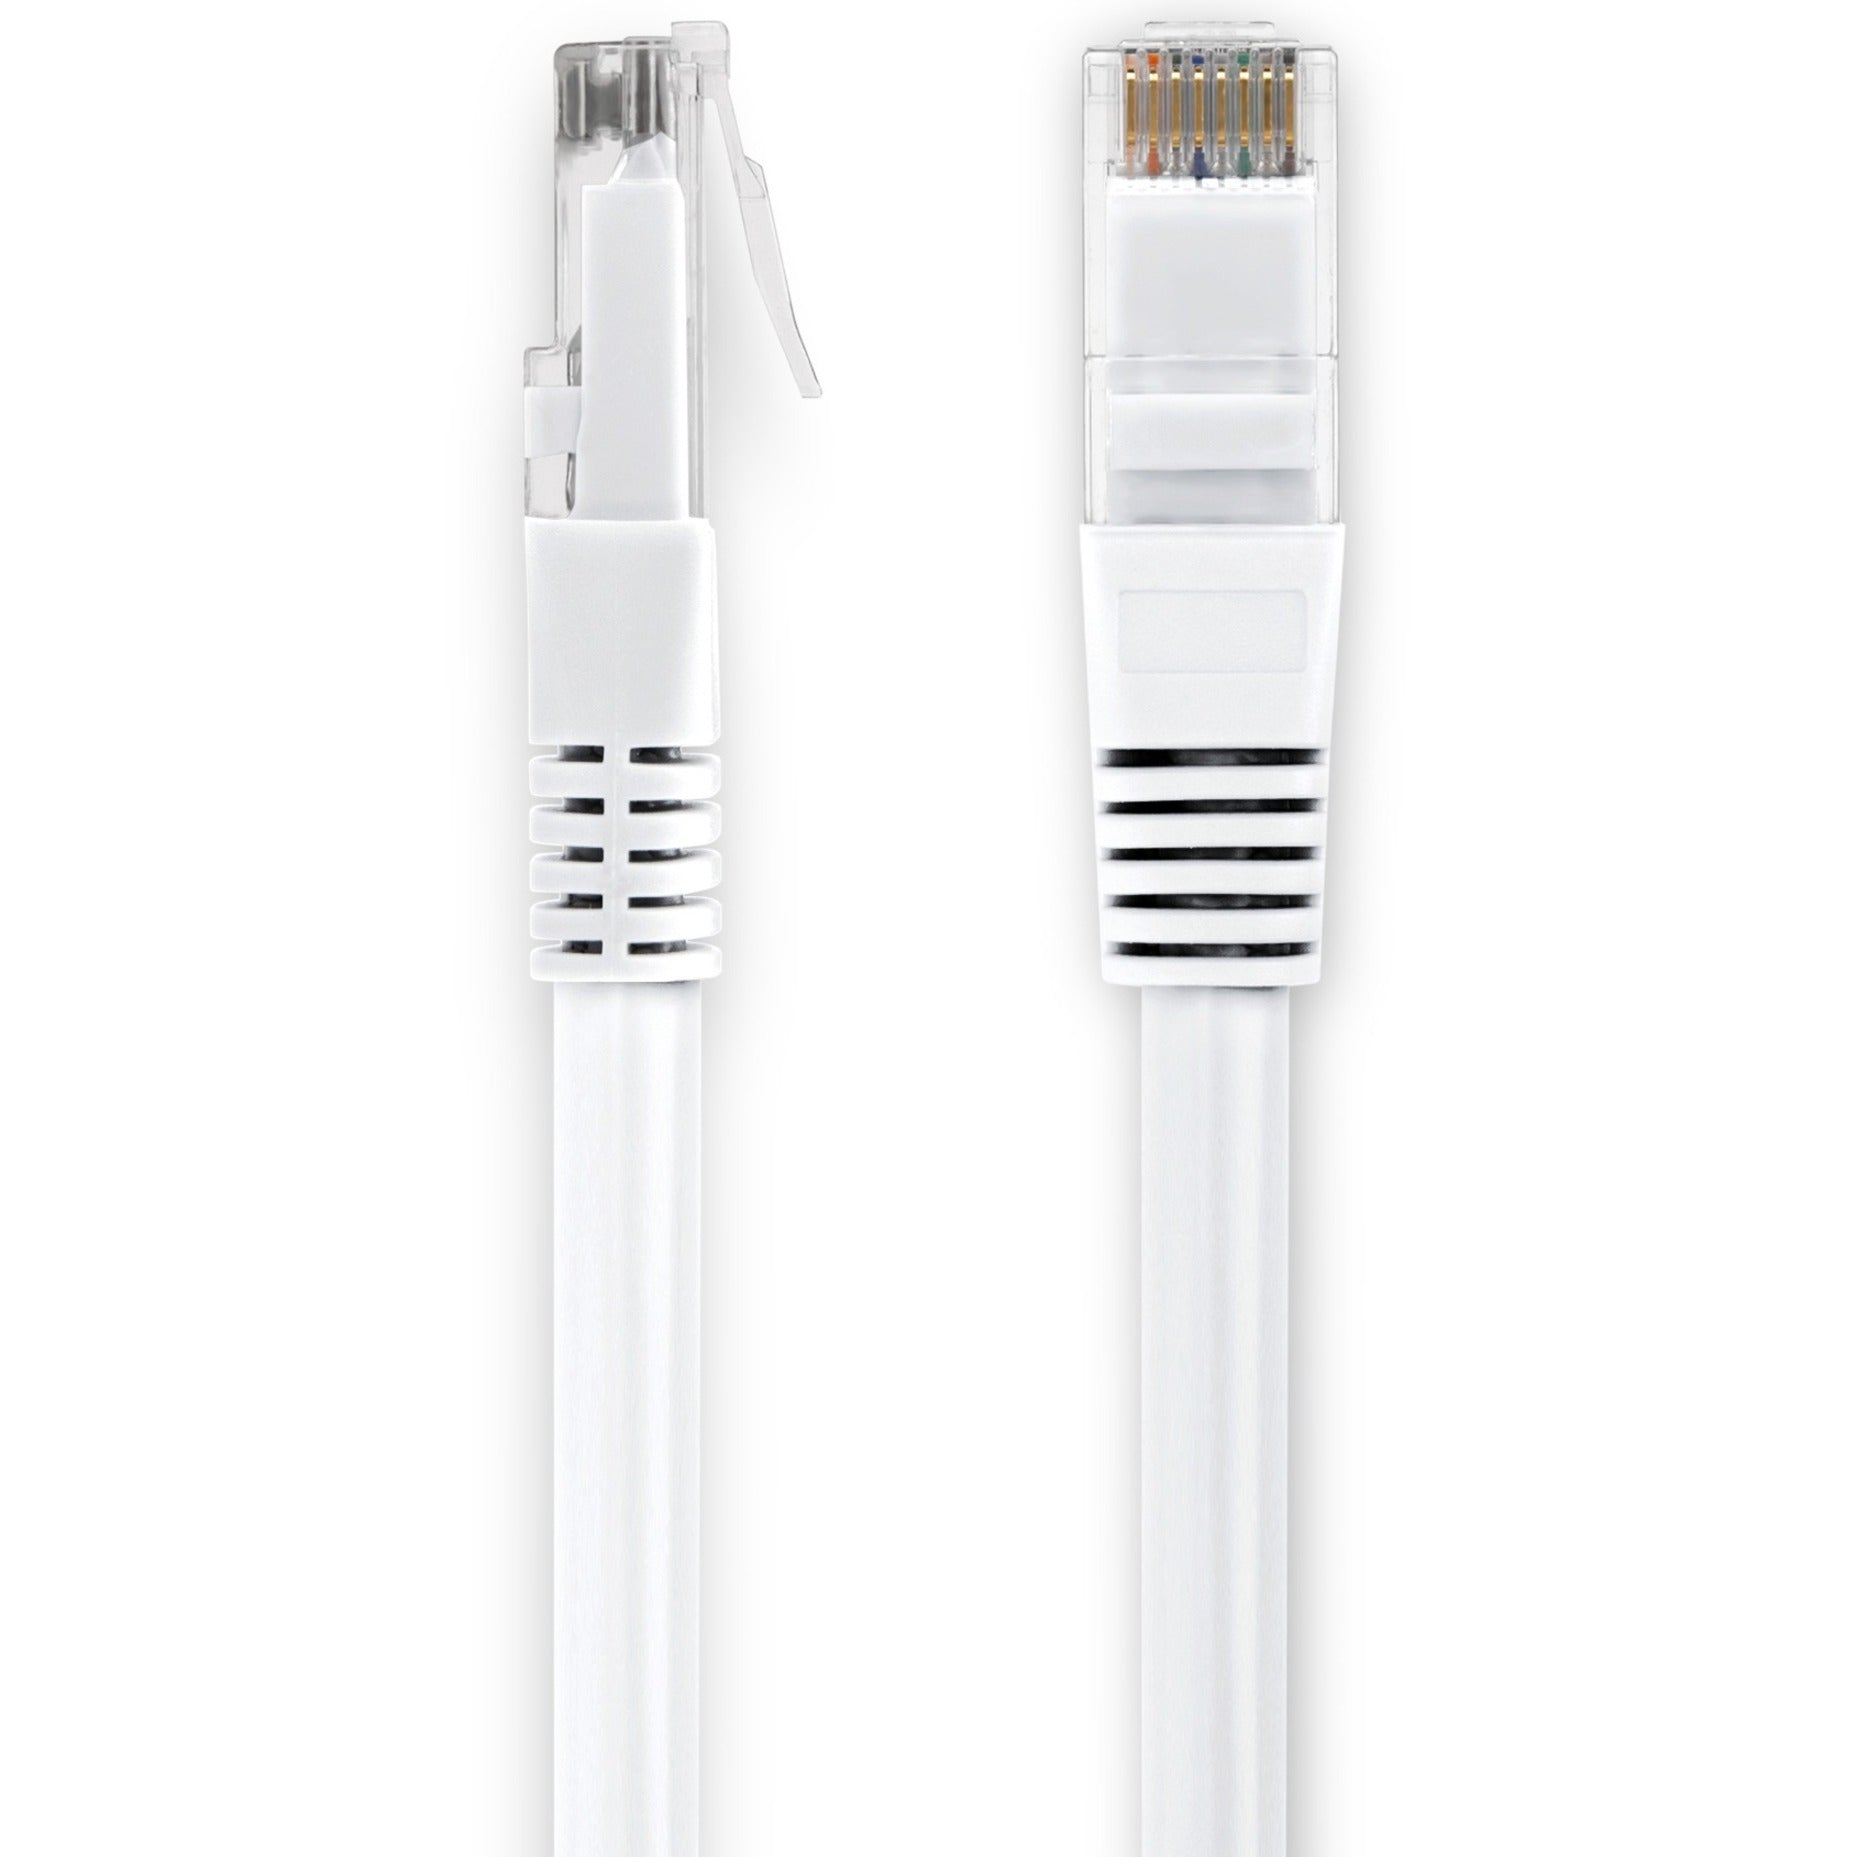 Rocstor Y10C388-WT Cat.6 Network Cable, 10 ft, 10 Gbit/s Data Transfer Rate, Molded